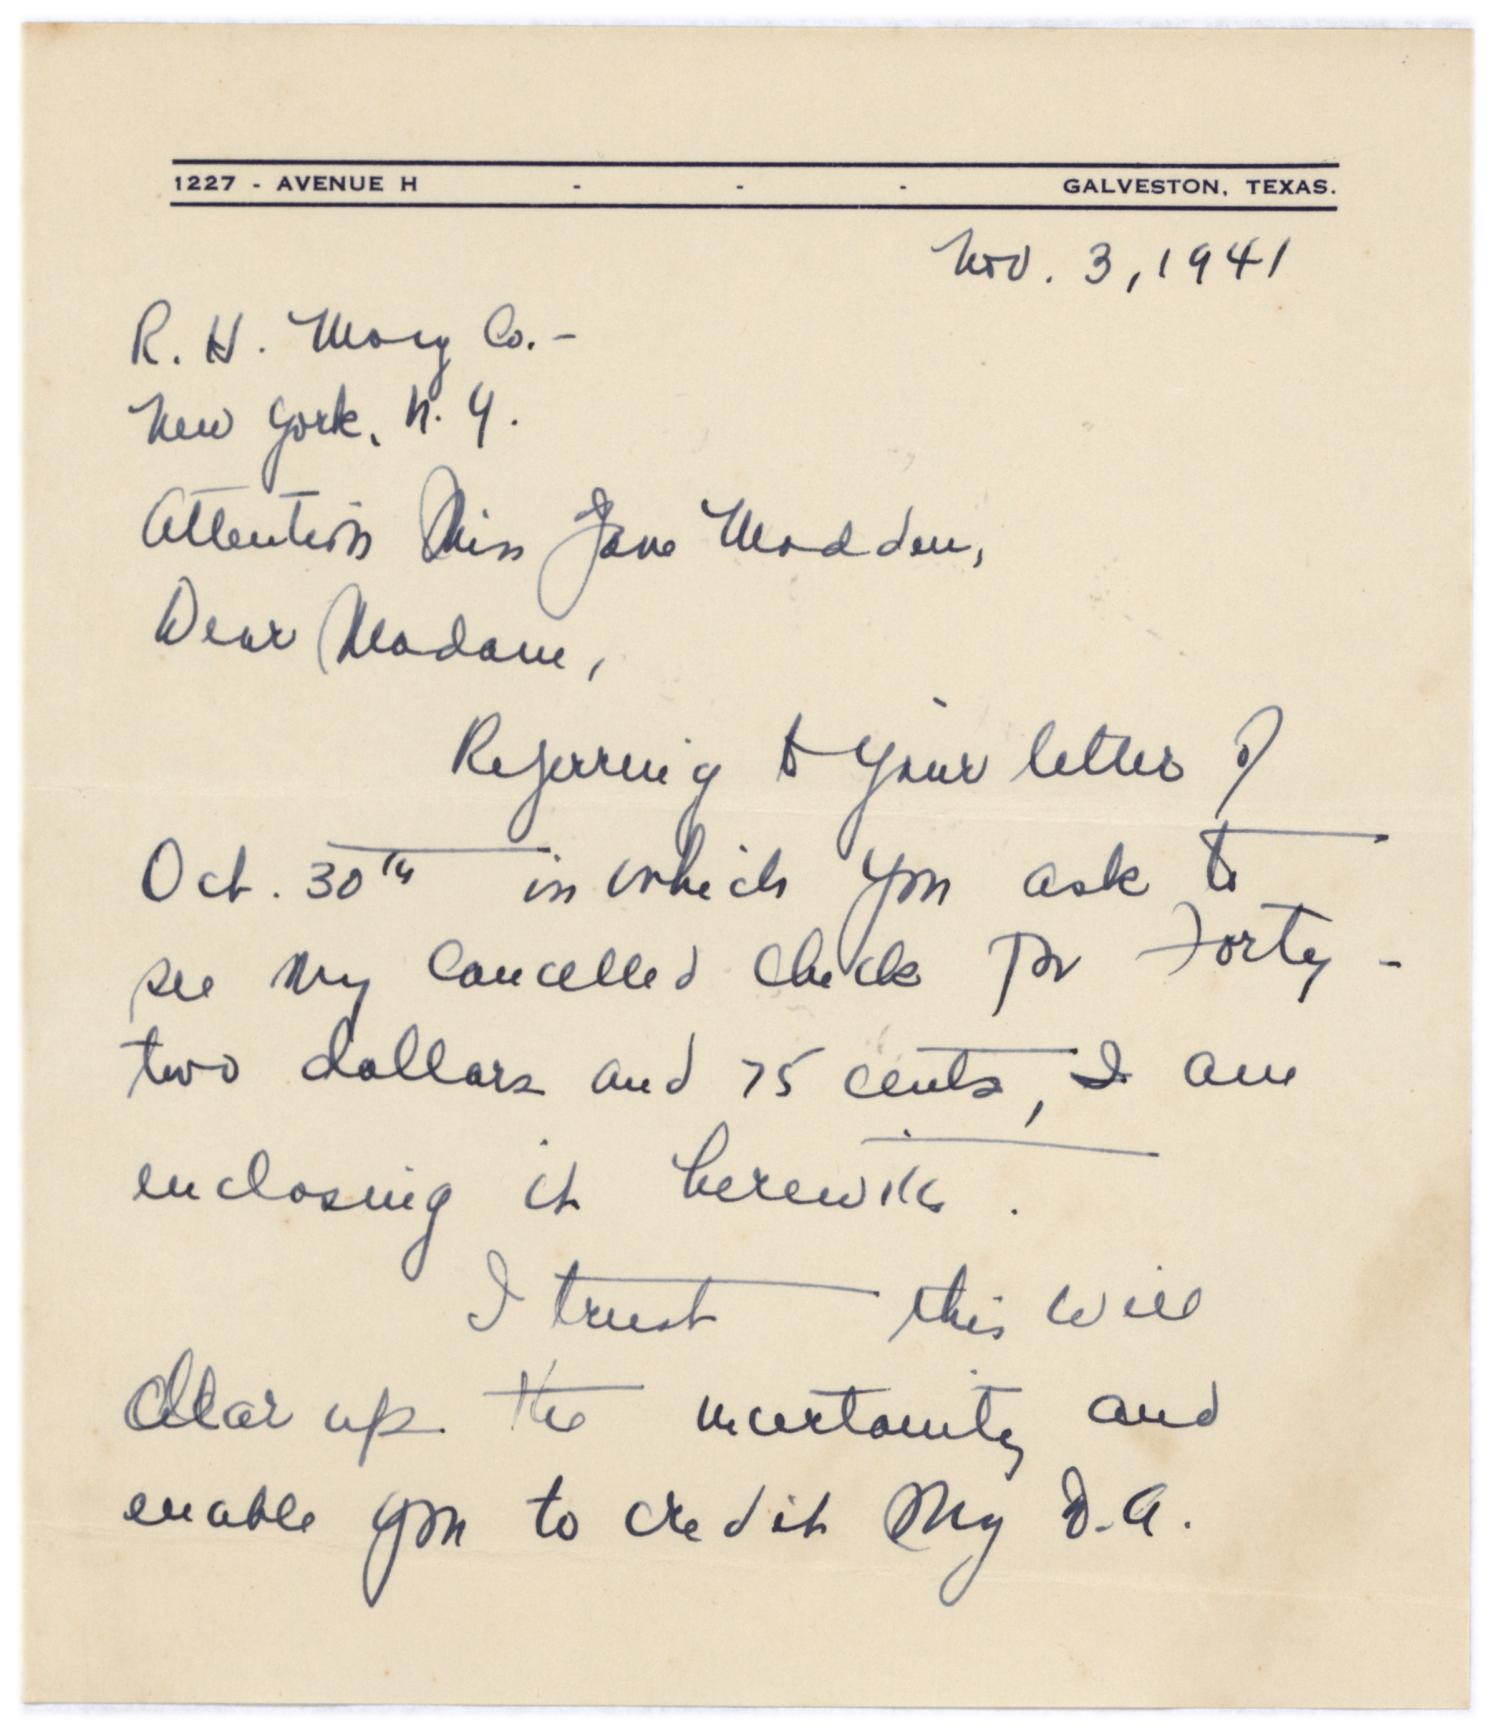 [Letter to R. H. Woy Co. - November 3, 1941]
                                                
                                                    [Sequence #]: 1 of 2
                                                